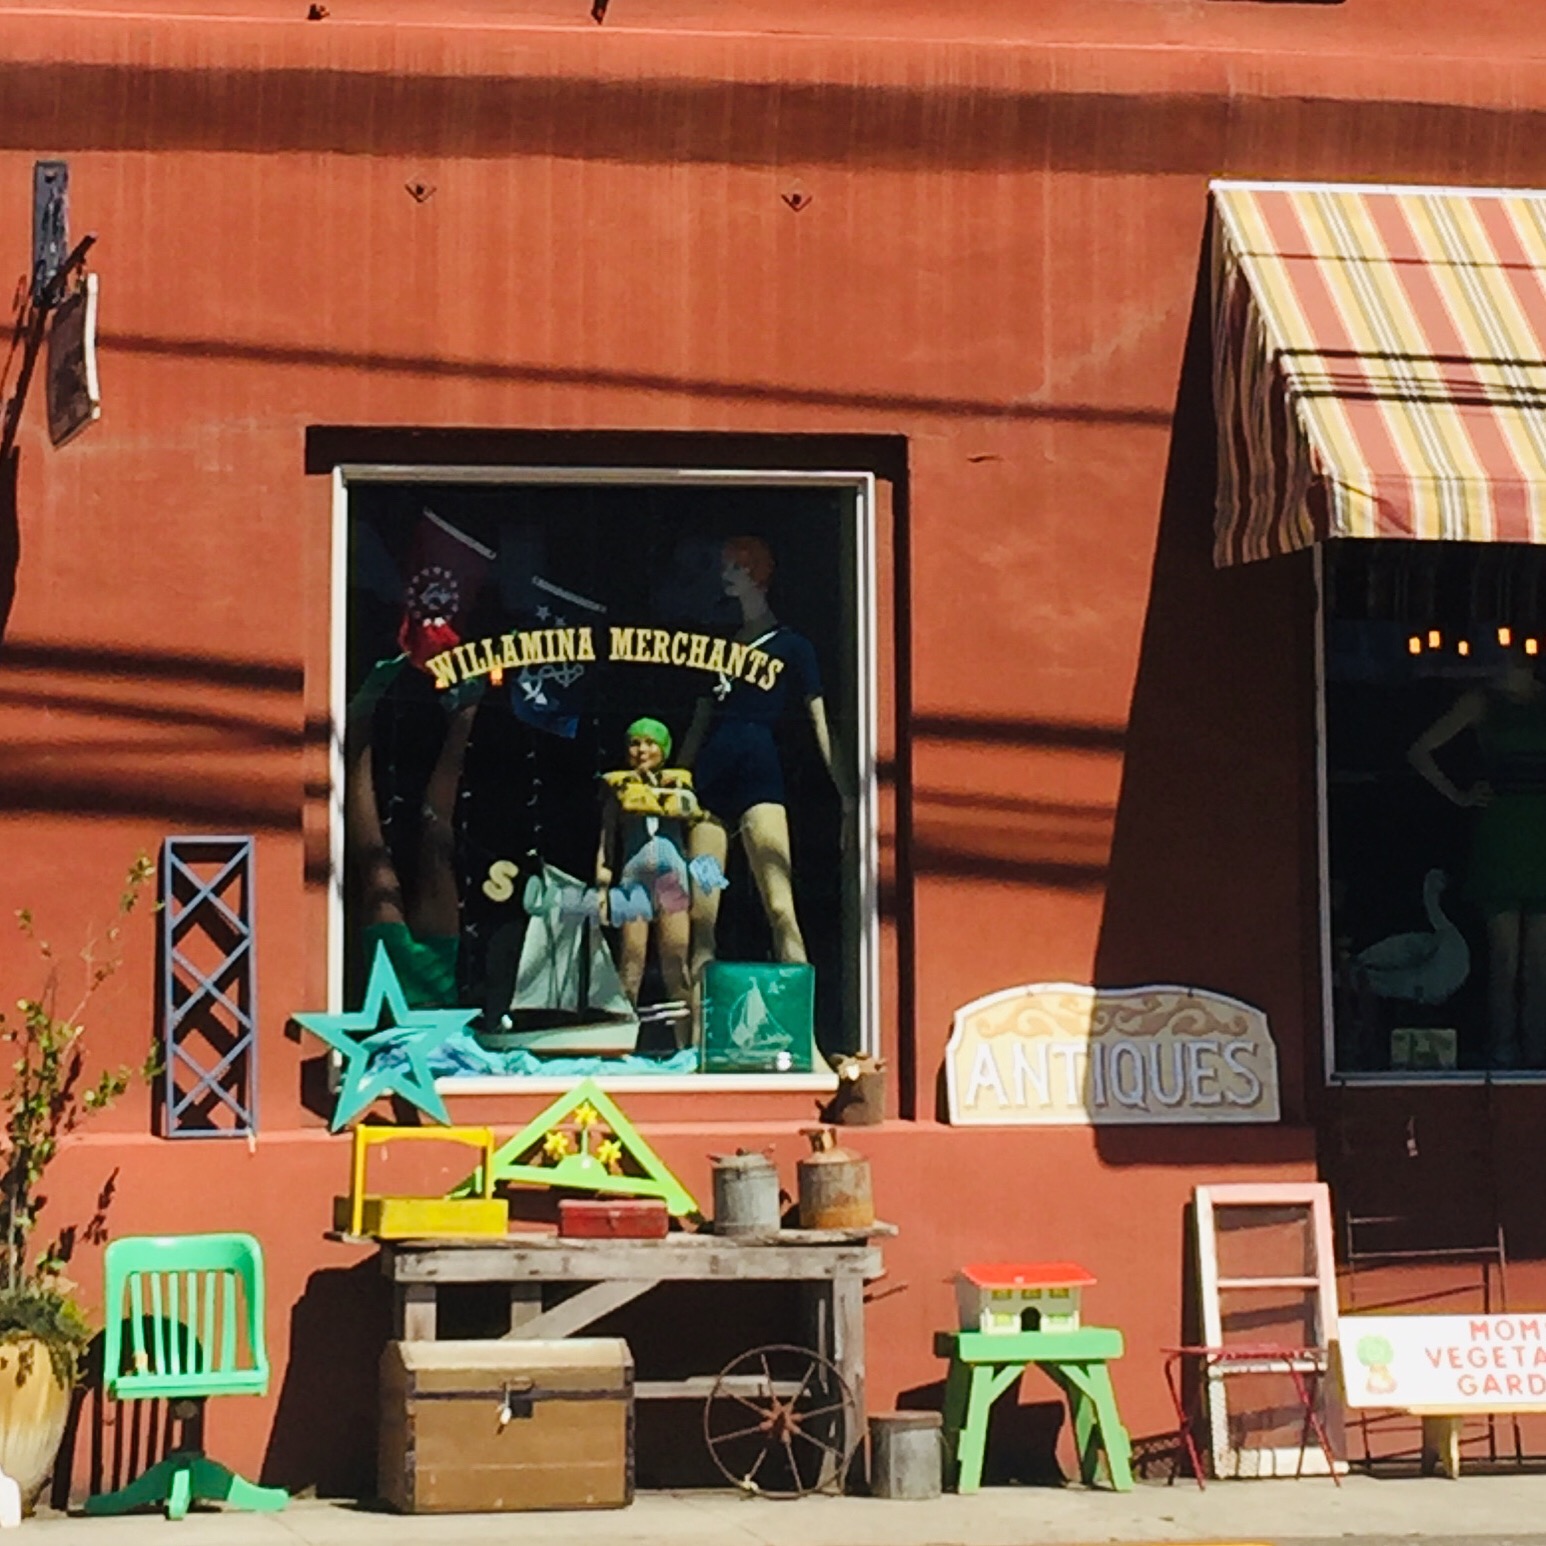 A picture of Willamina Merchants store front with decorations outside.